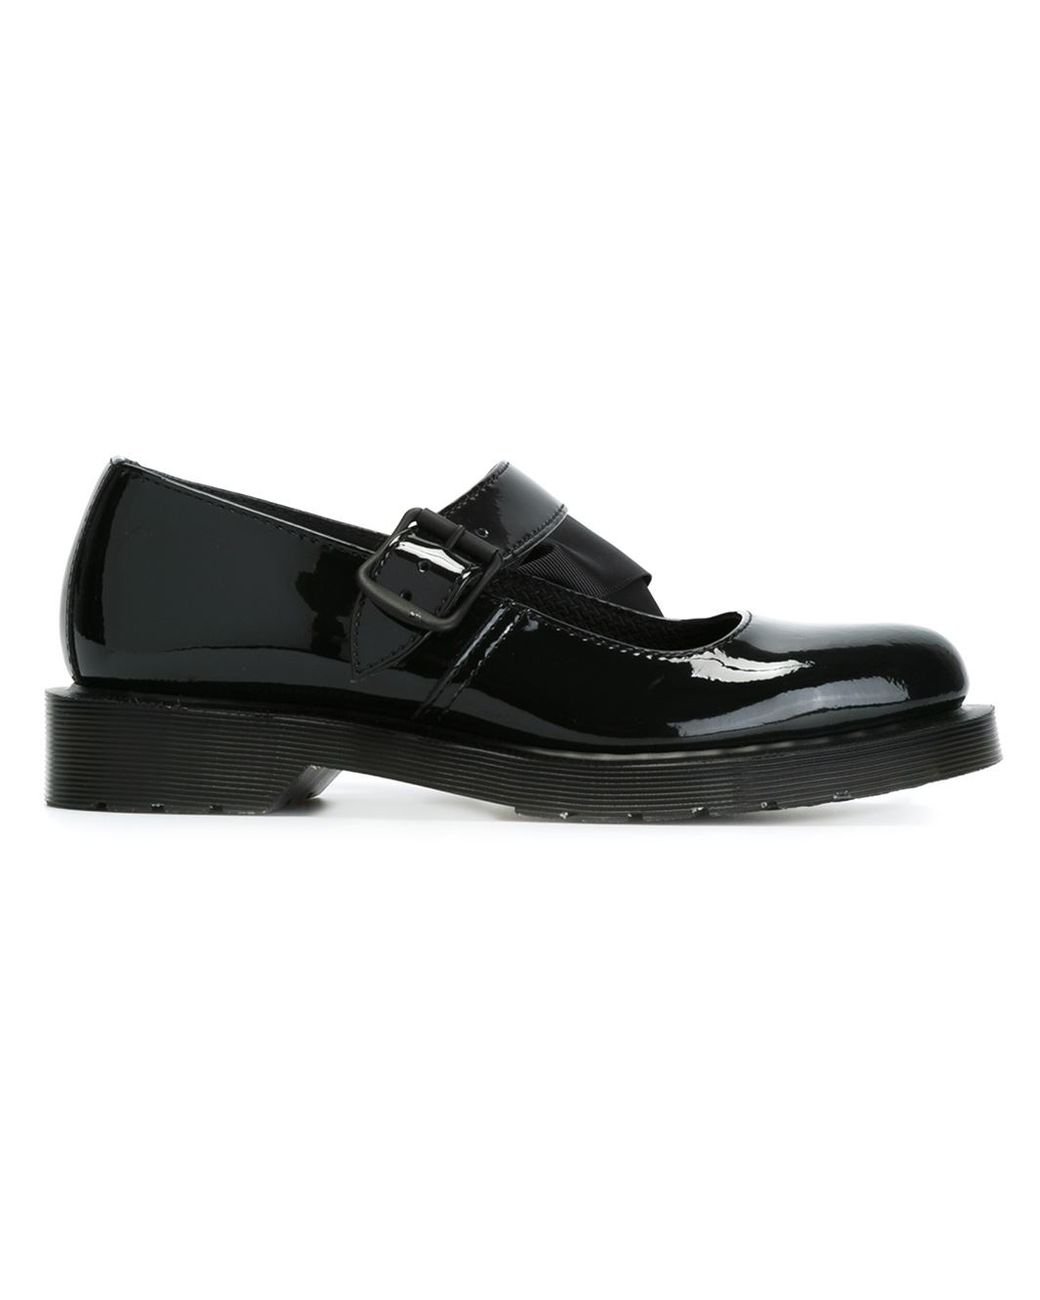 Dr. Martens Mariel Patent-Leather Mary-Jane Shoes in Black | Lyst UK